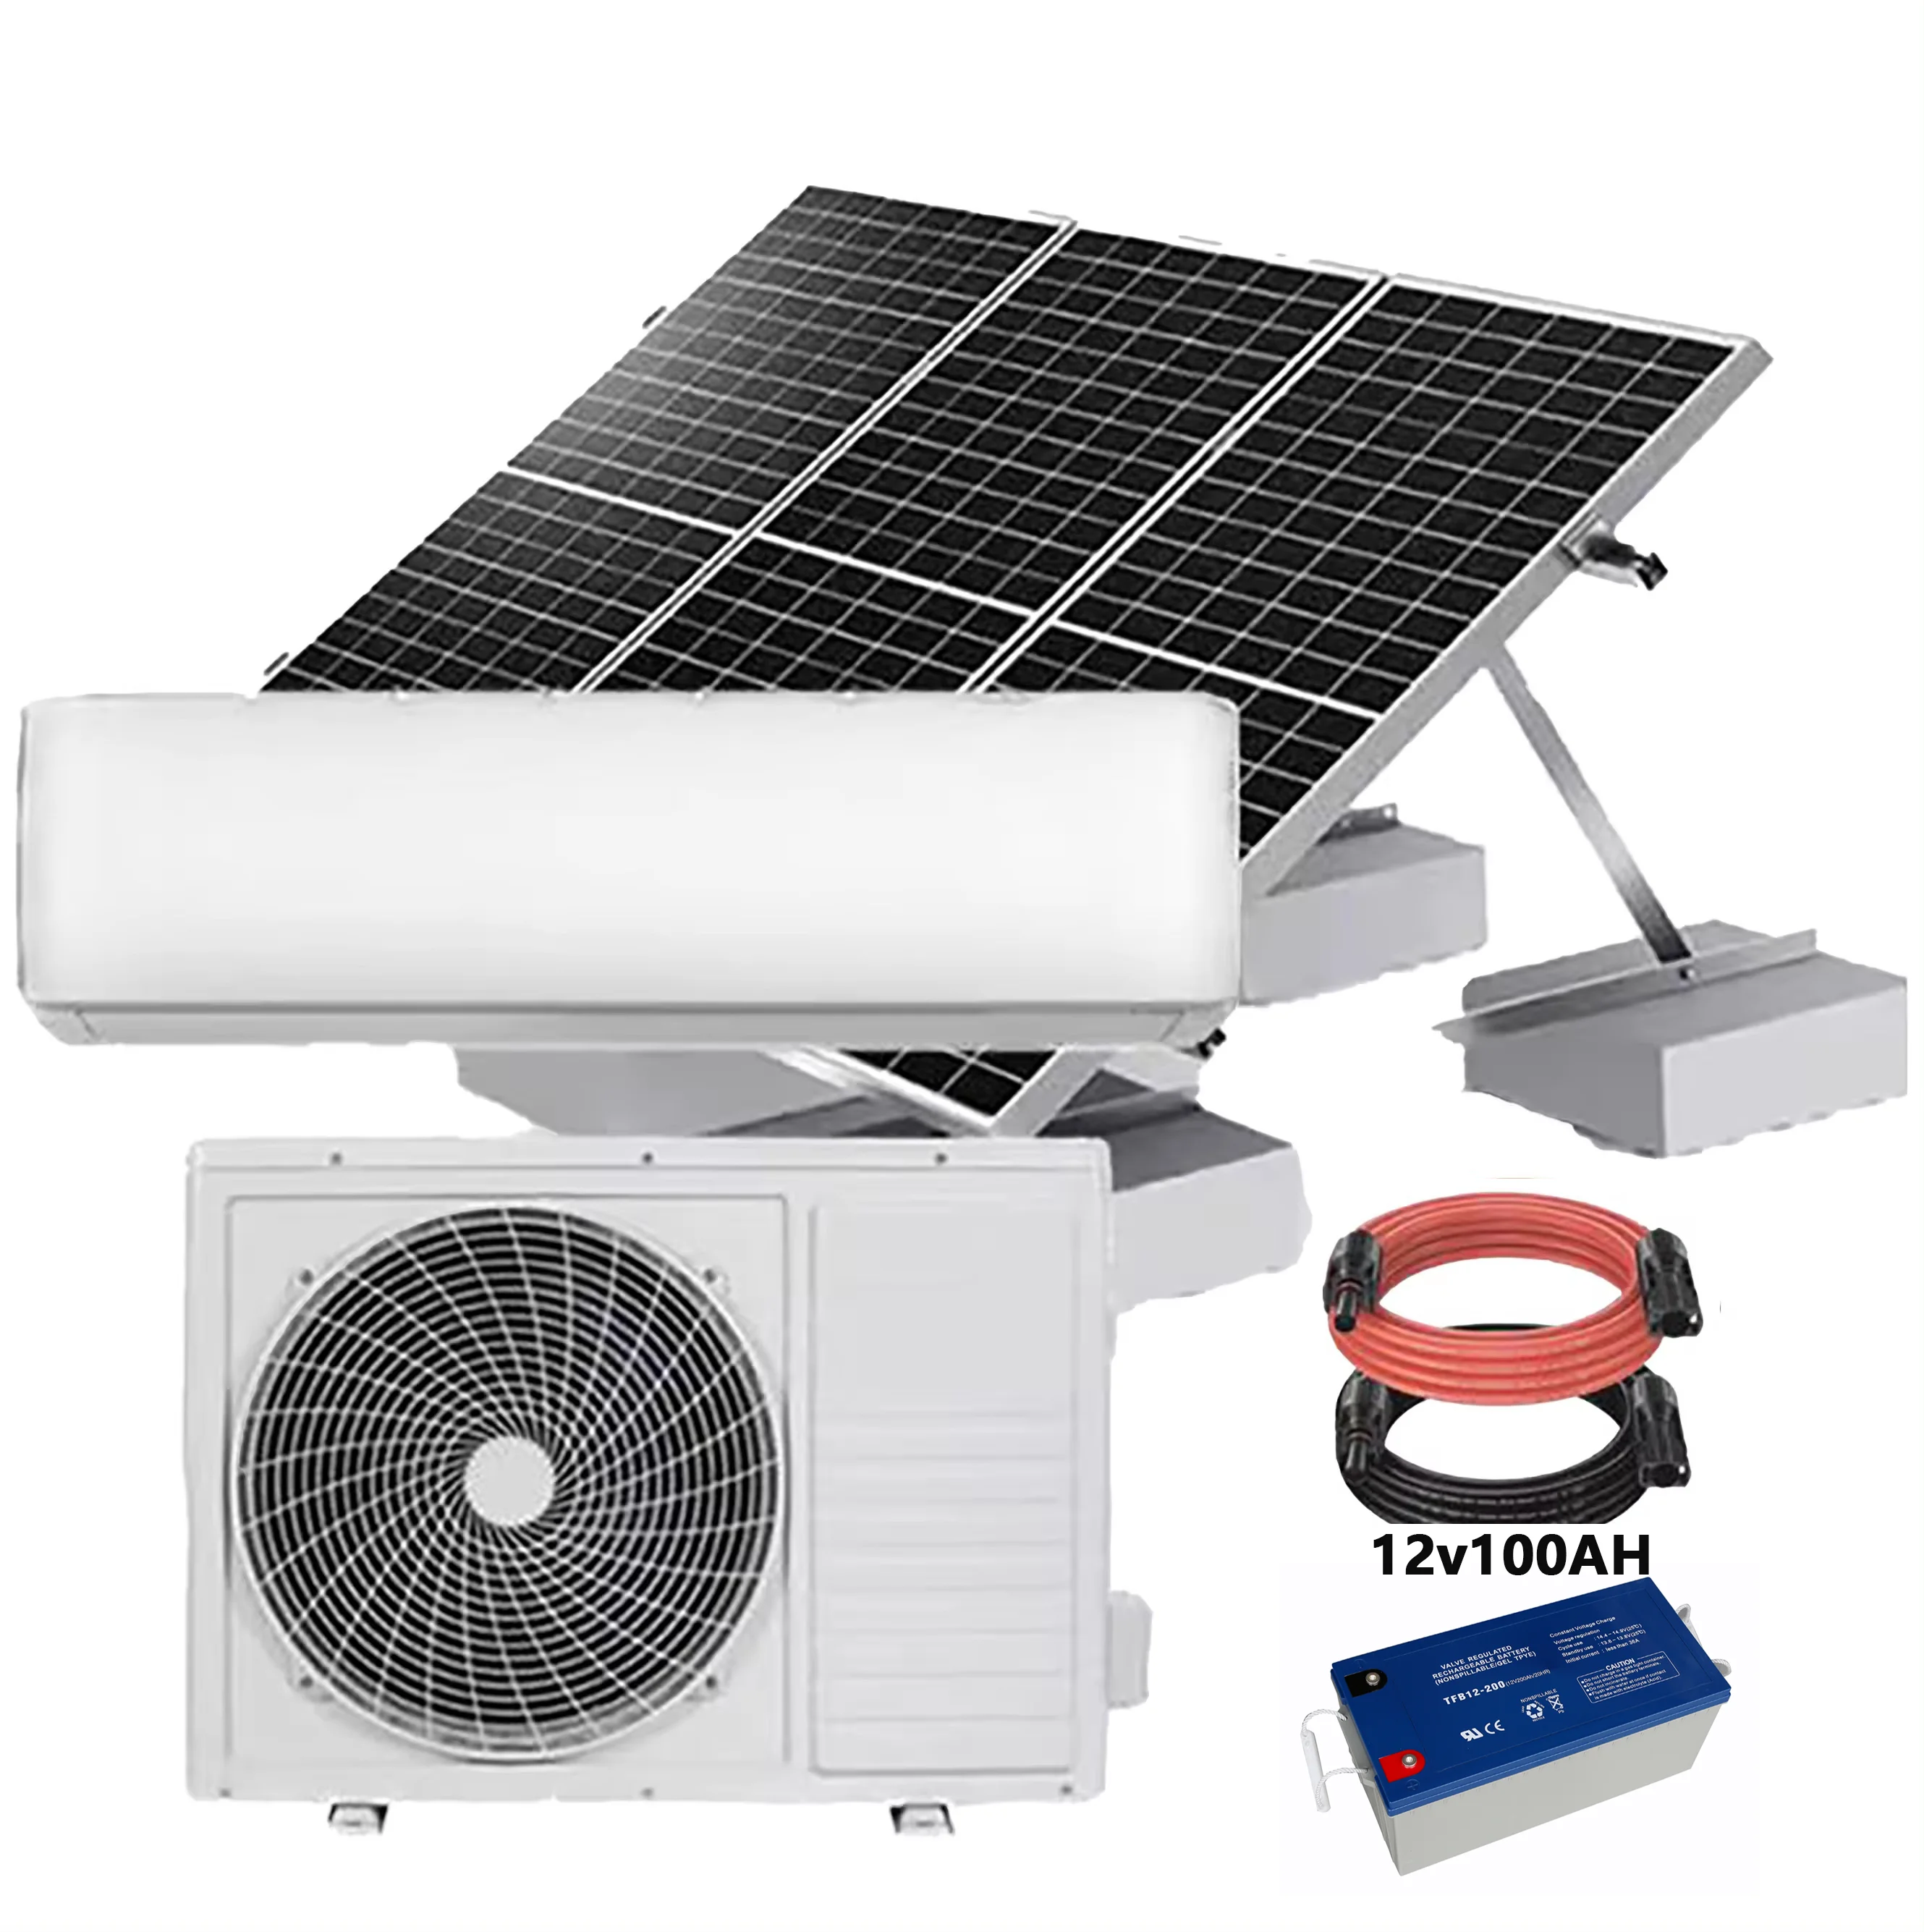 

philippines 9000 btu 0.5 hp used ac wall air conditioner units wifi smart control hybrid solar air conditioner with panels